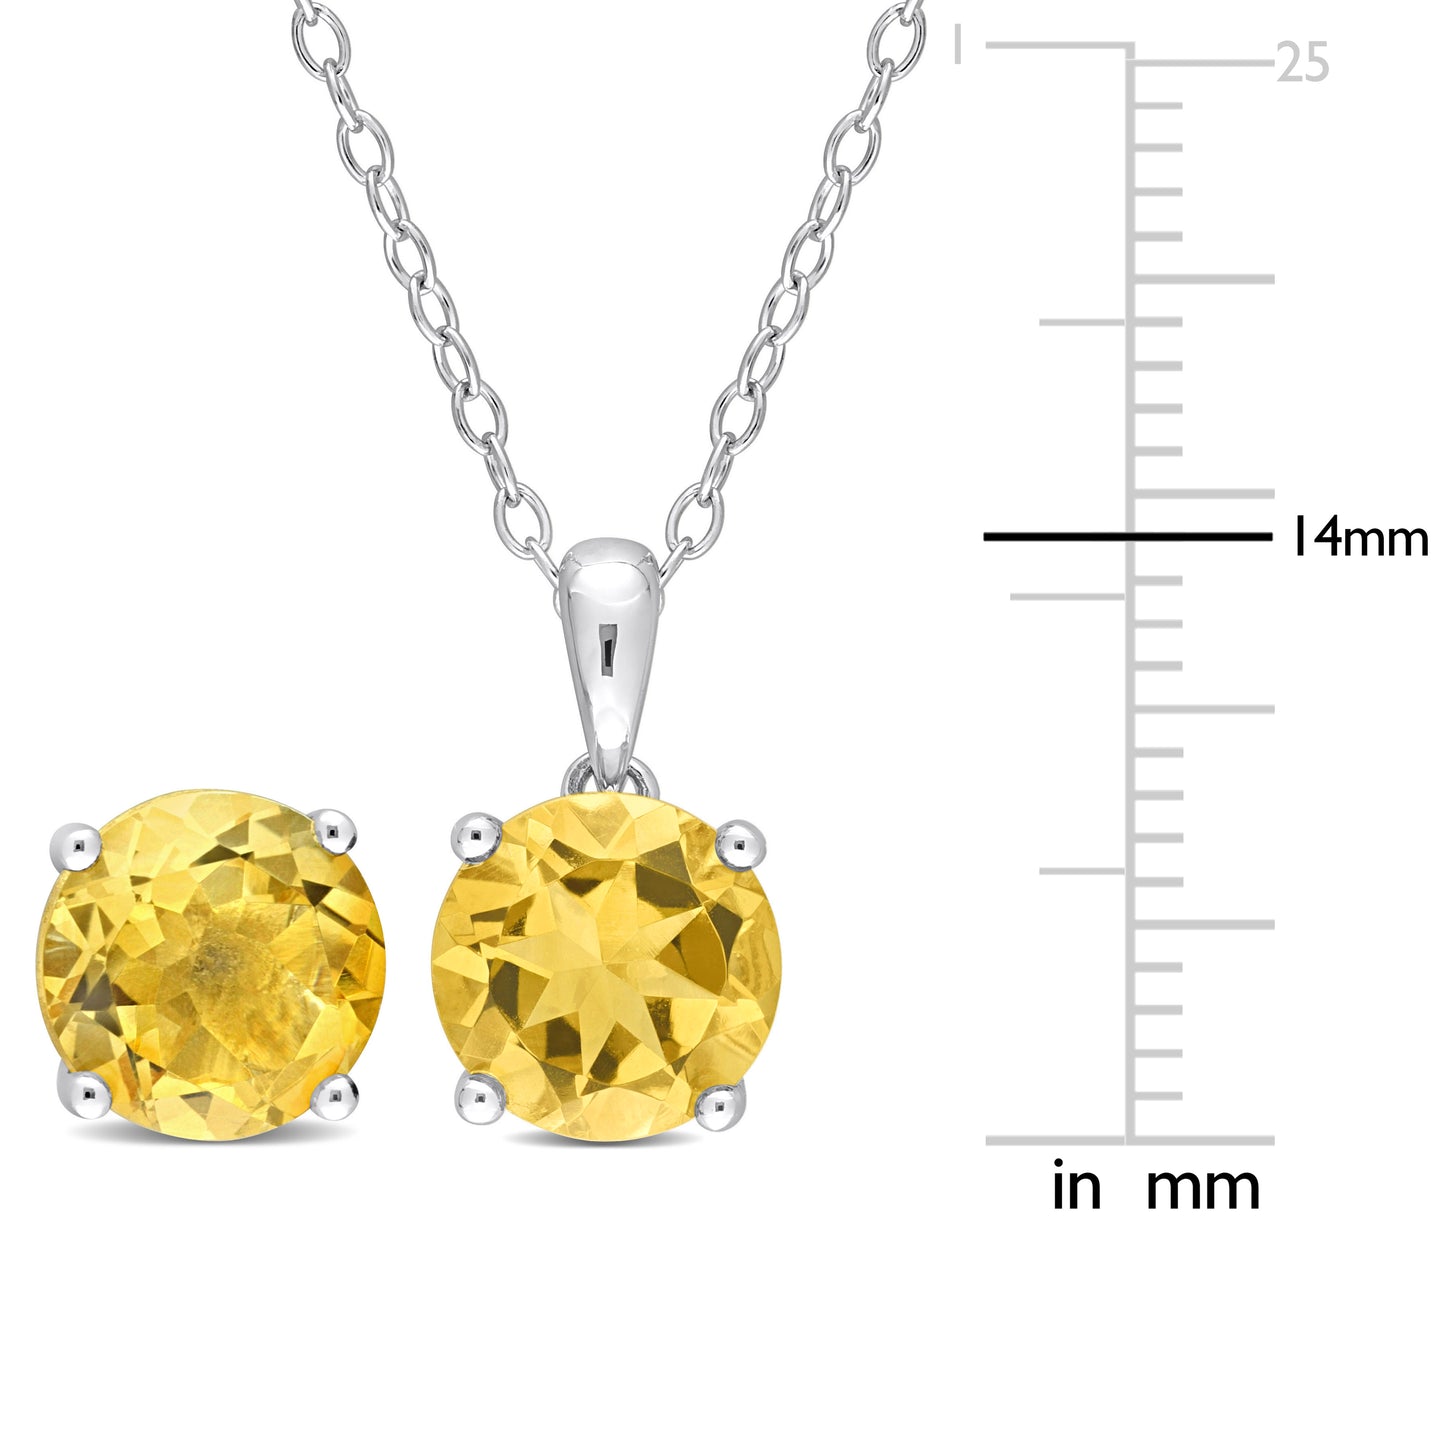 5 3/5 ct TGW Citrine set with chain silver